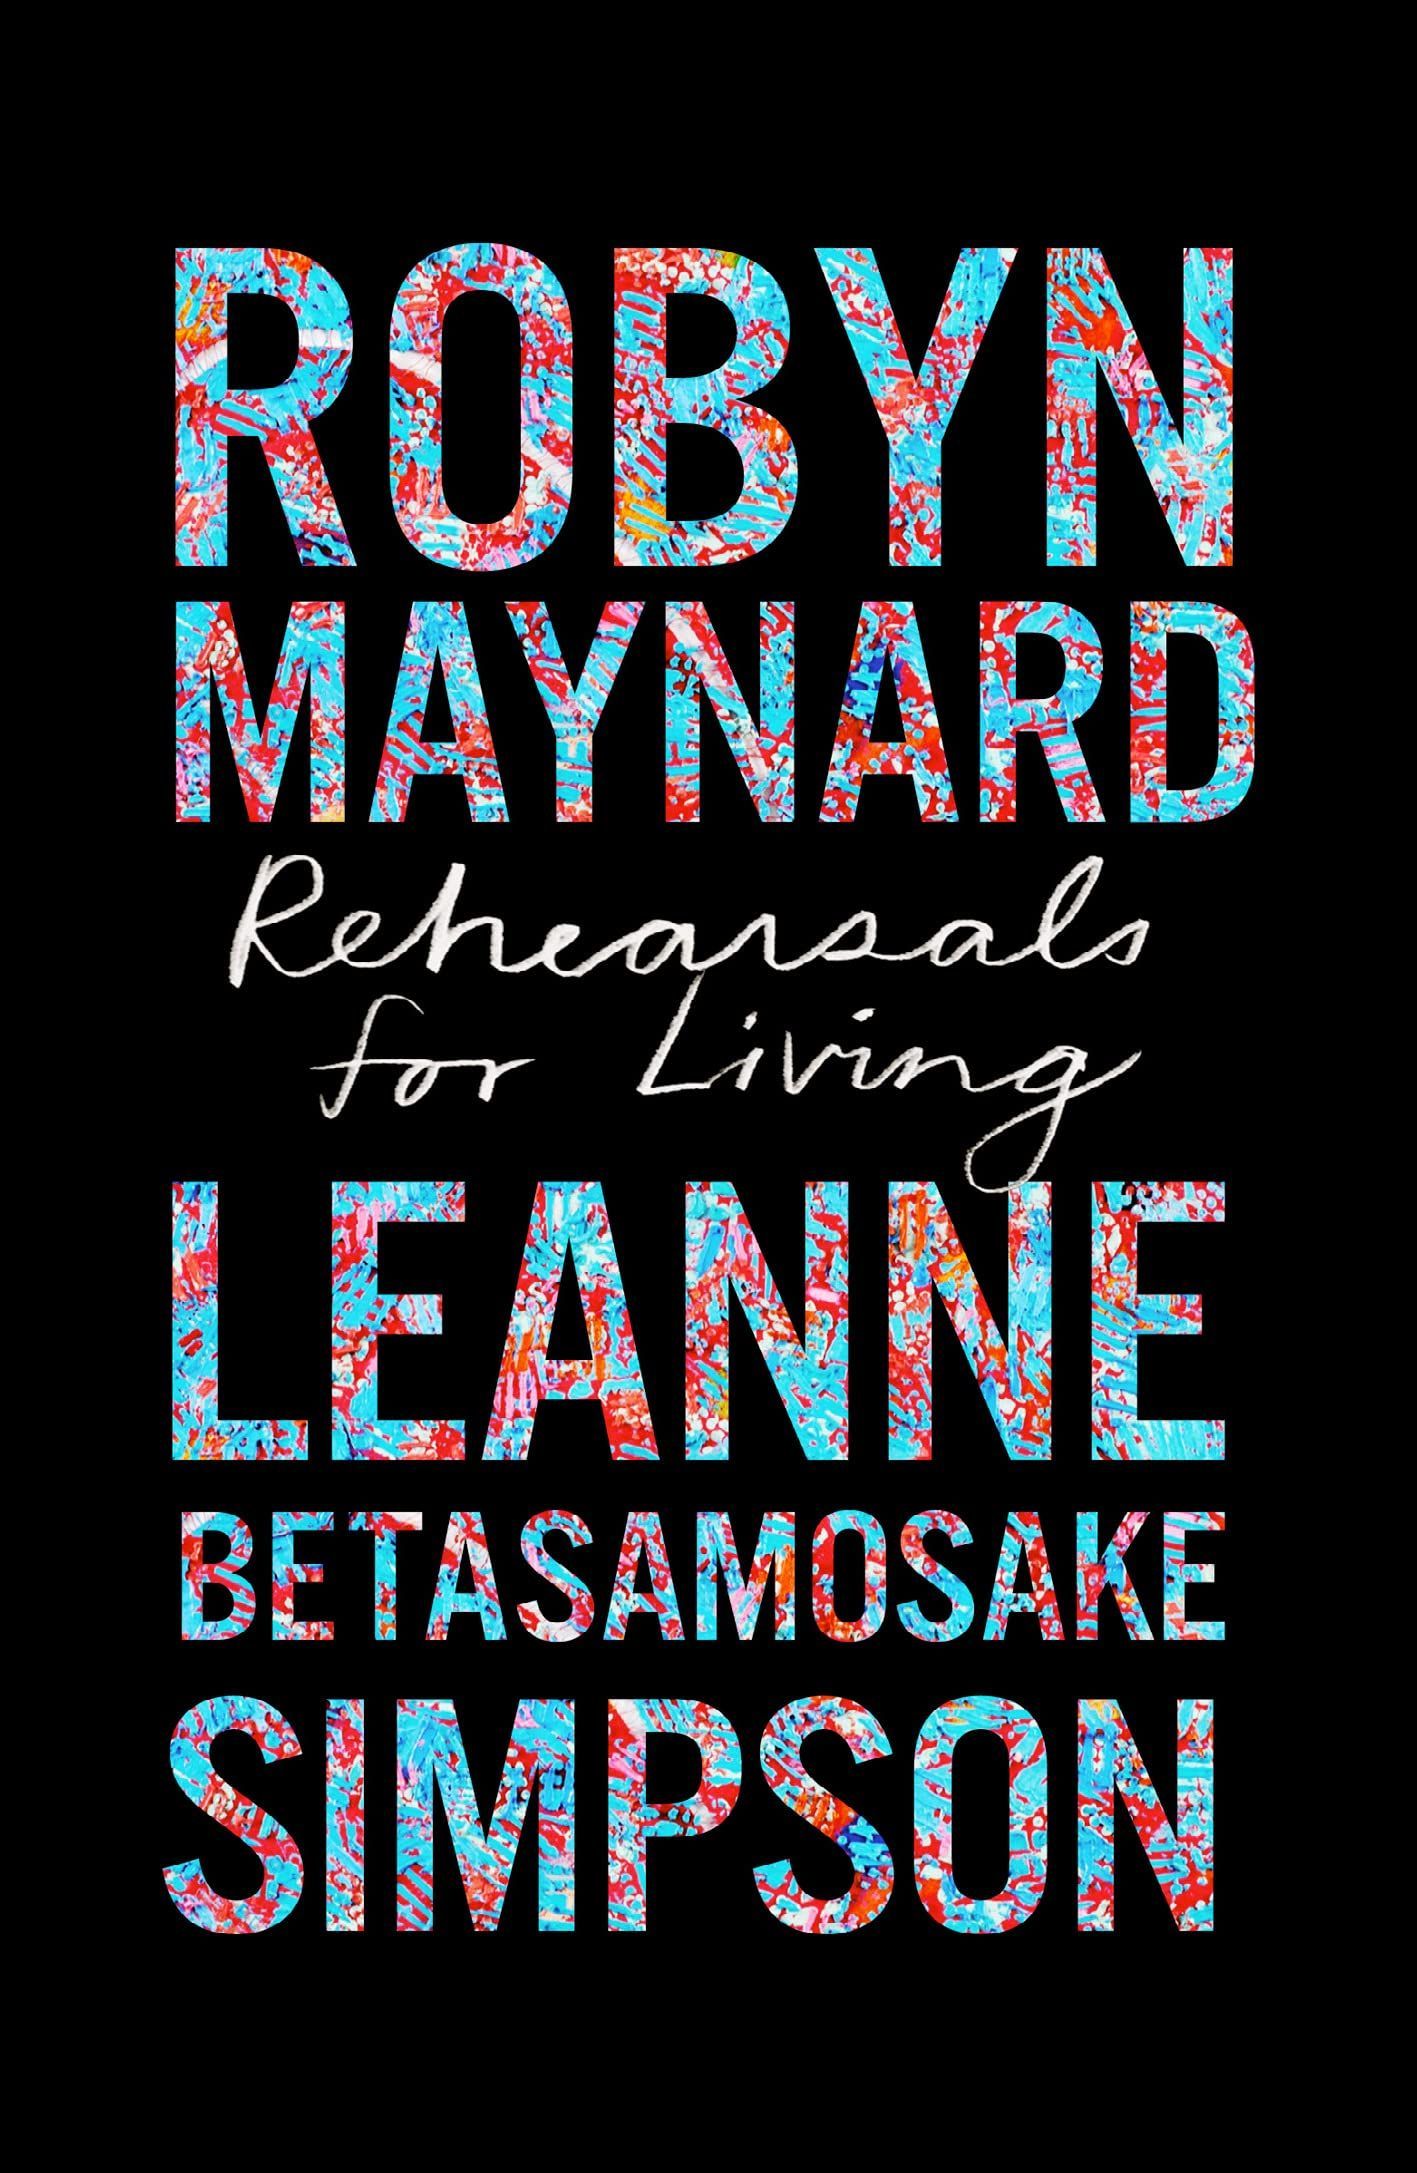 The World Beyond This One: On Robyn Maynard and Leanne Betasamosake Simpson’s “Rehearsals for Living”